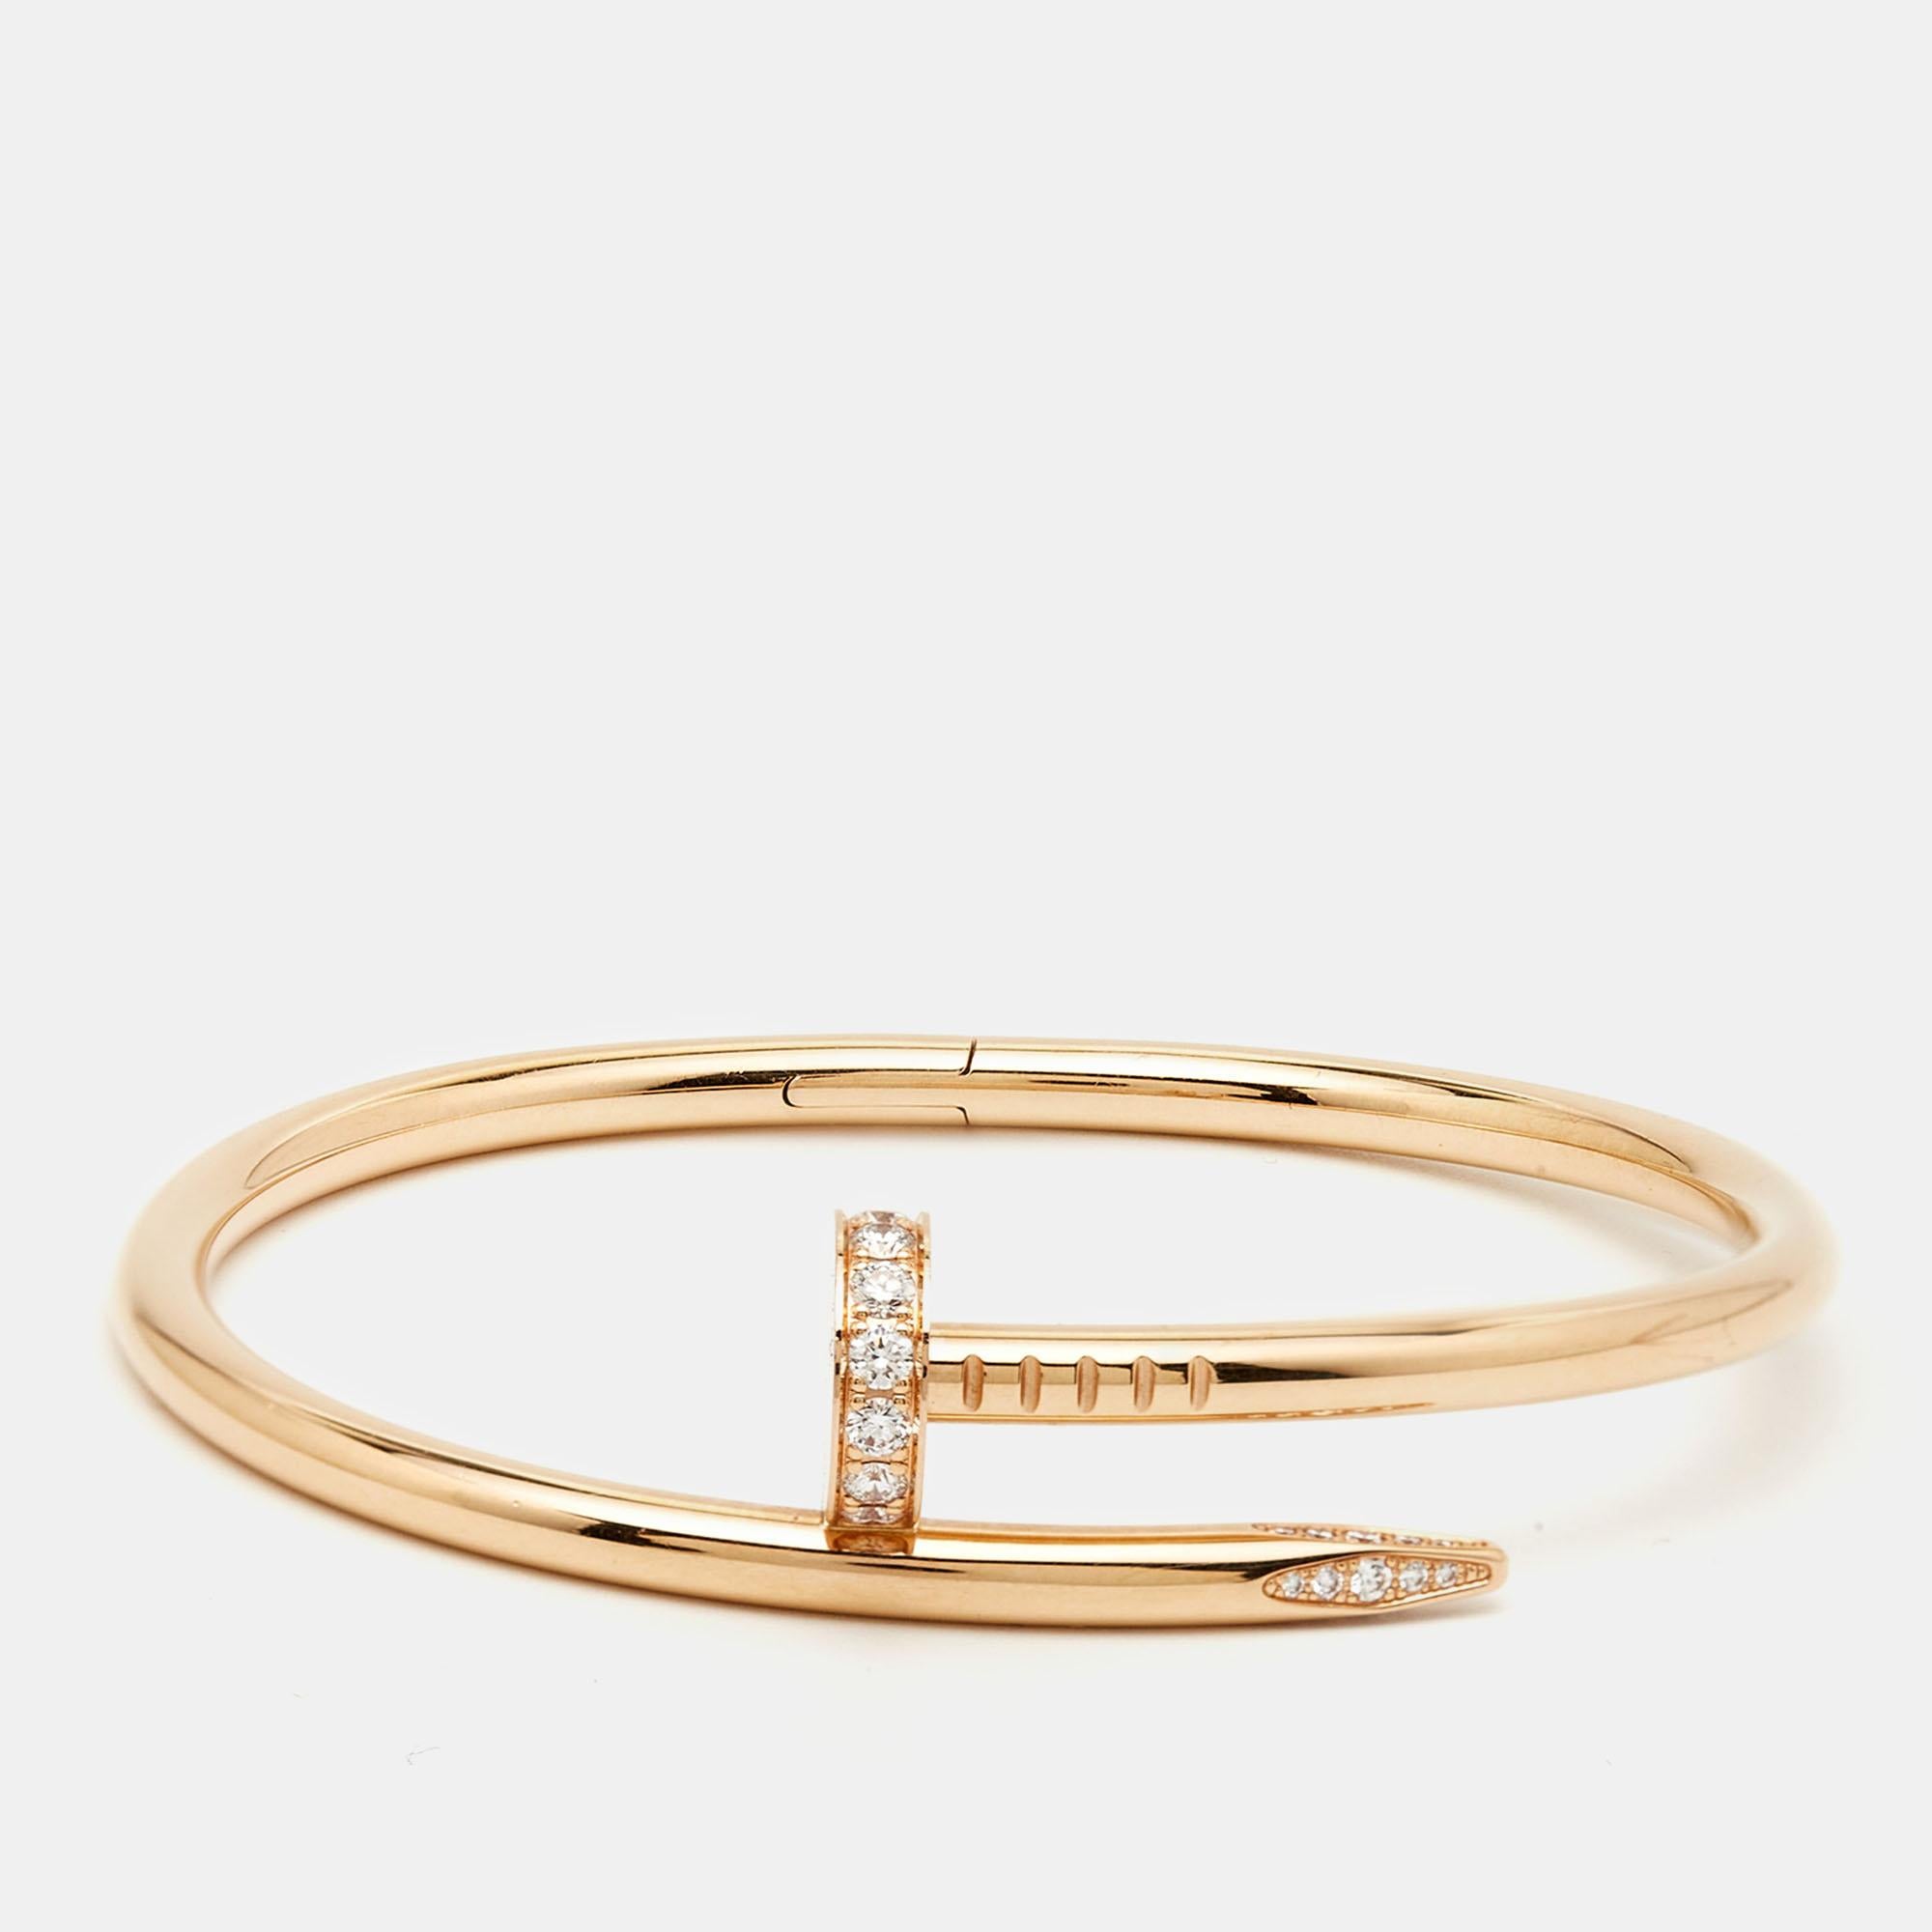 The Cartier Juste Un Clou bracelet is an iconic and luxurious piece of jewelry. Crafted from gleaming 18k rose gold and diamonds, its sleek and minimalist design captures the essence of a nail transformed into an elegant and distinctive fashion